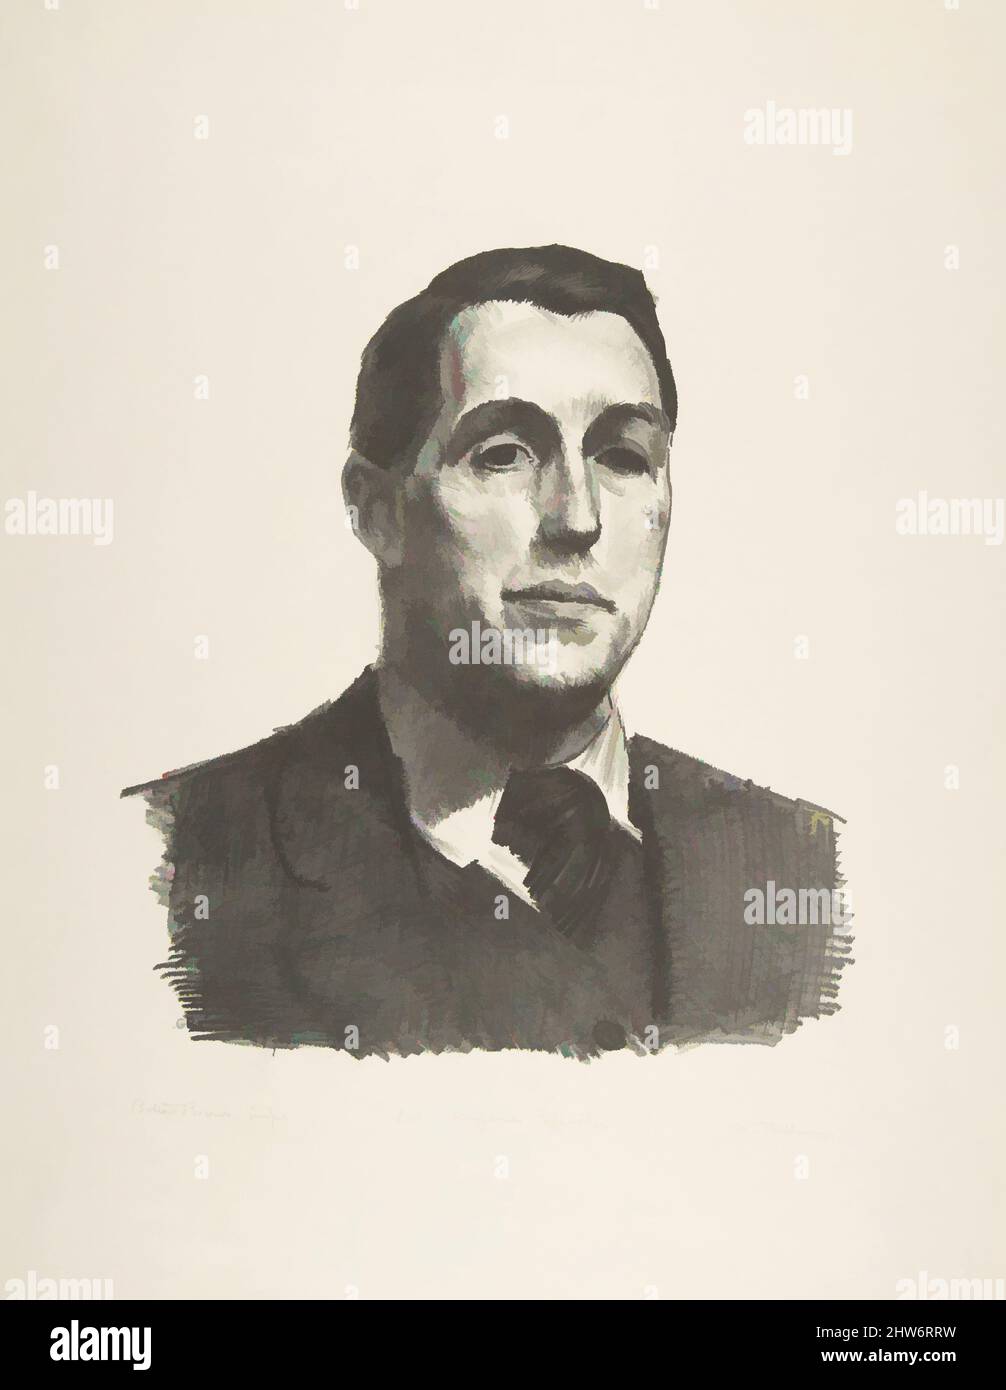 Art inspired by Portrait of Eugene Speicher, First Stone, 1923–24, Lithograph, image: 9 x 8 1/4 in. (22.9 x 21 cm), Prints, George Bellows (American, Columbus, Ohio 1882–1925 New York, Classic works modernized by Artotop with a splash of modernity. Shapes, color and value, eye-catching visual impact on art. Emotions through freedom of artworks in a contemporary way. A timeless message pursuing a wildly creative new direction. Artists turning to the digital medium and creating the Artotop NFT Stock Photo